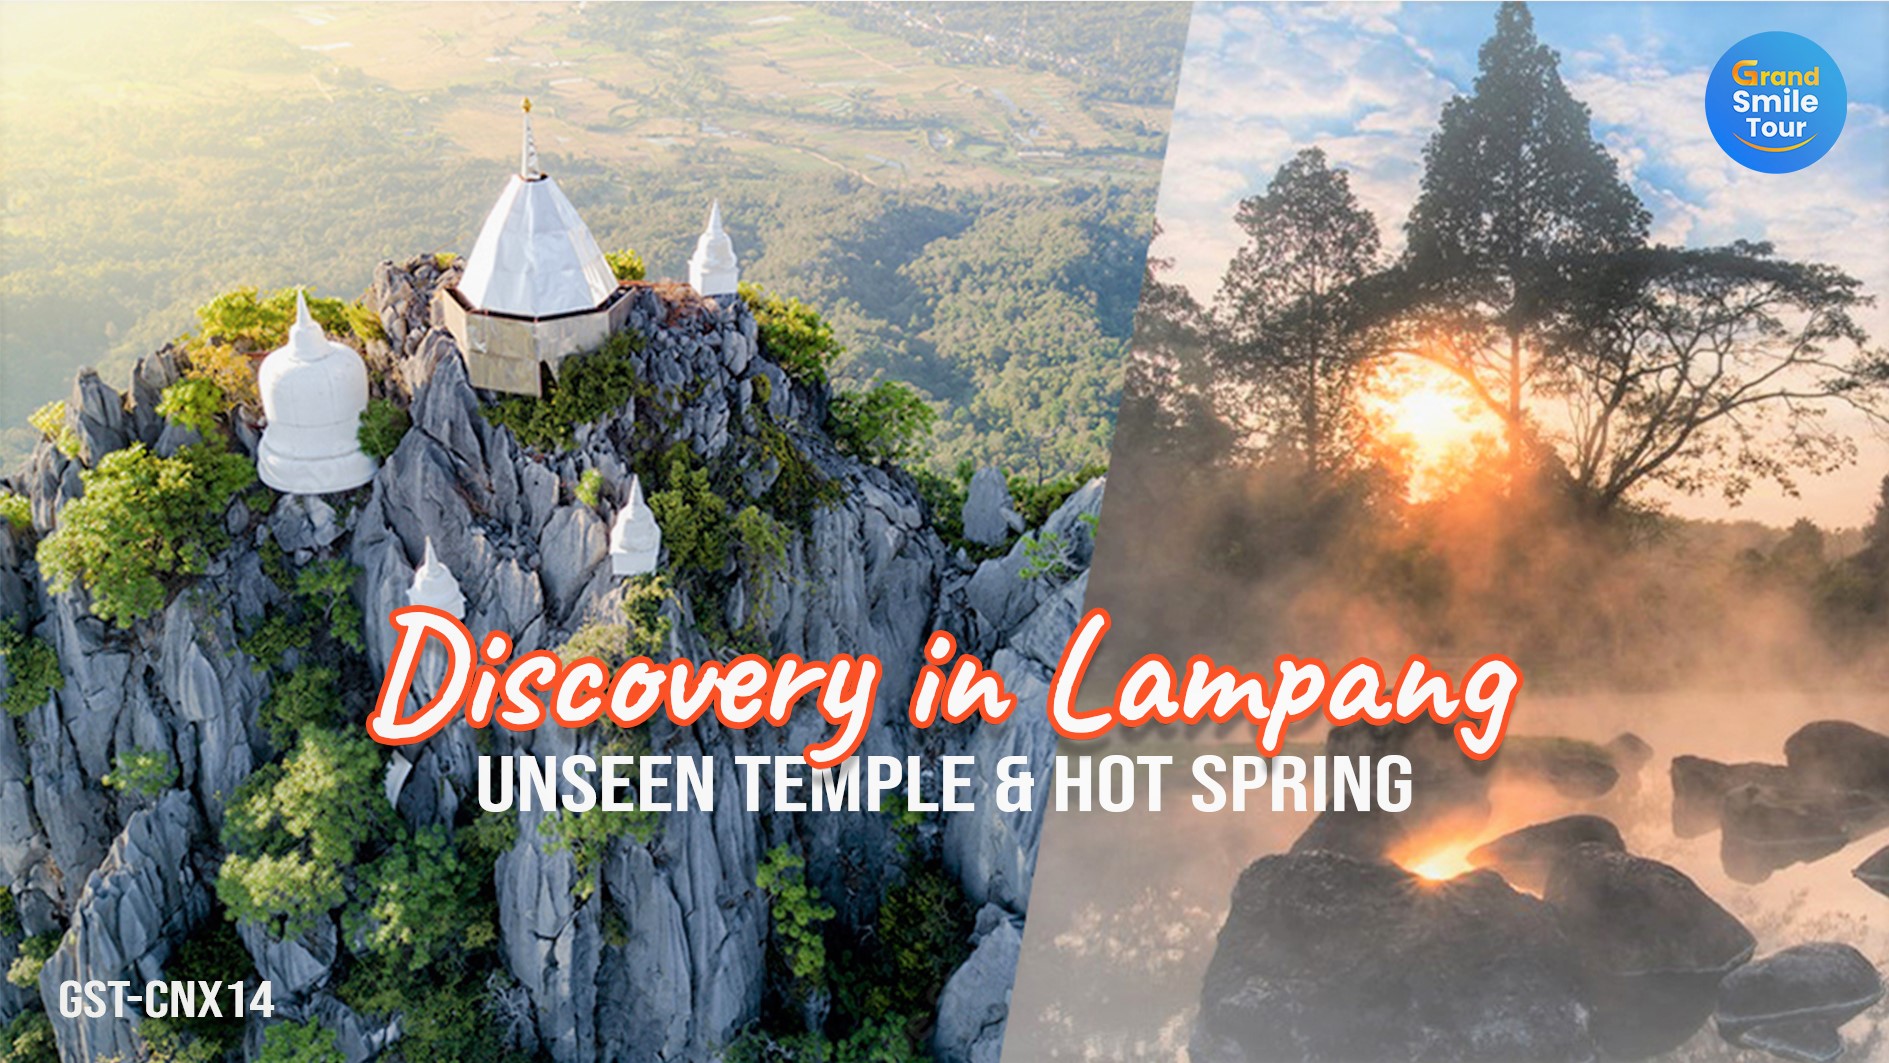 GST-CNX14 Discovery in Lampang Unseen Temples & Hot Spring